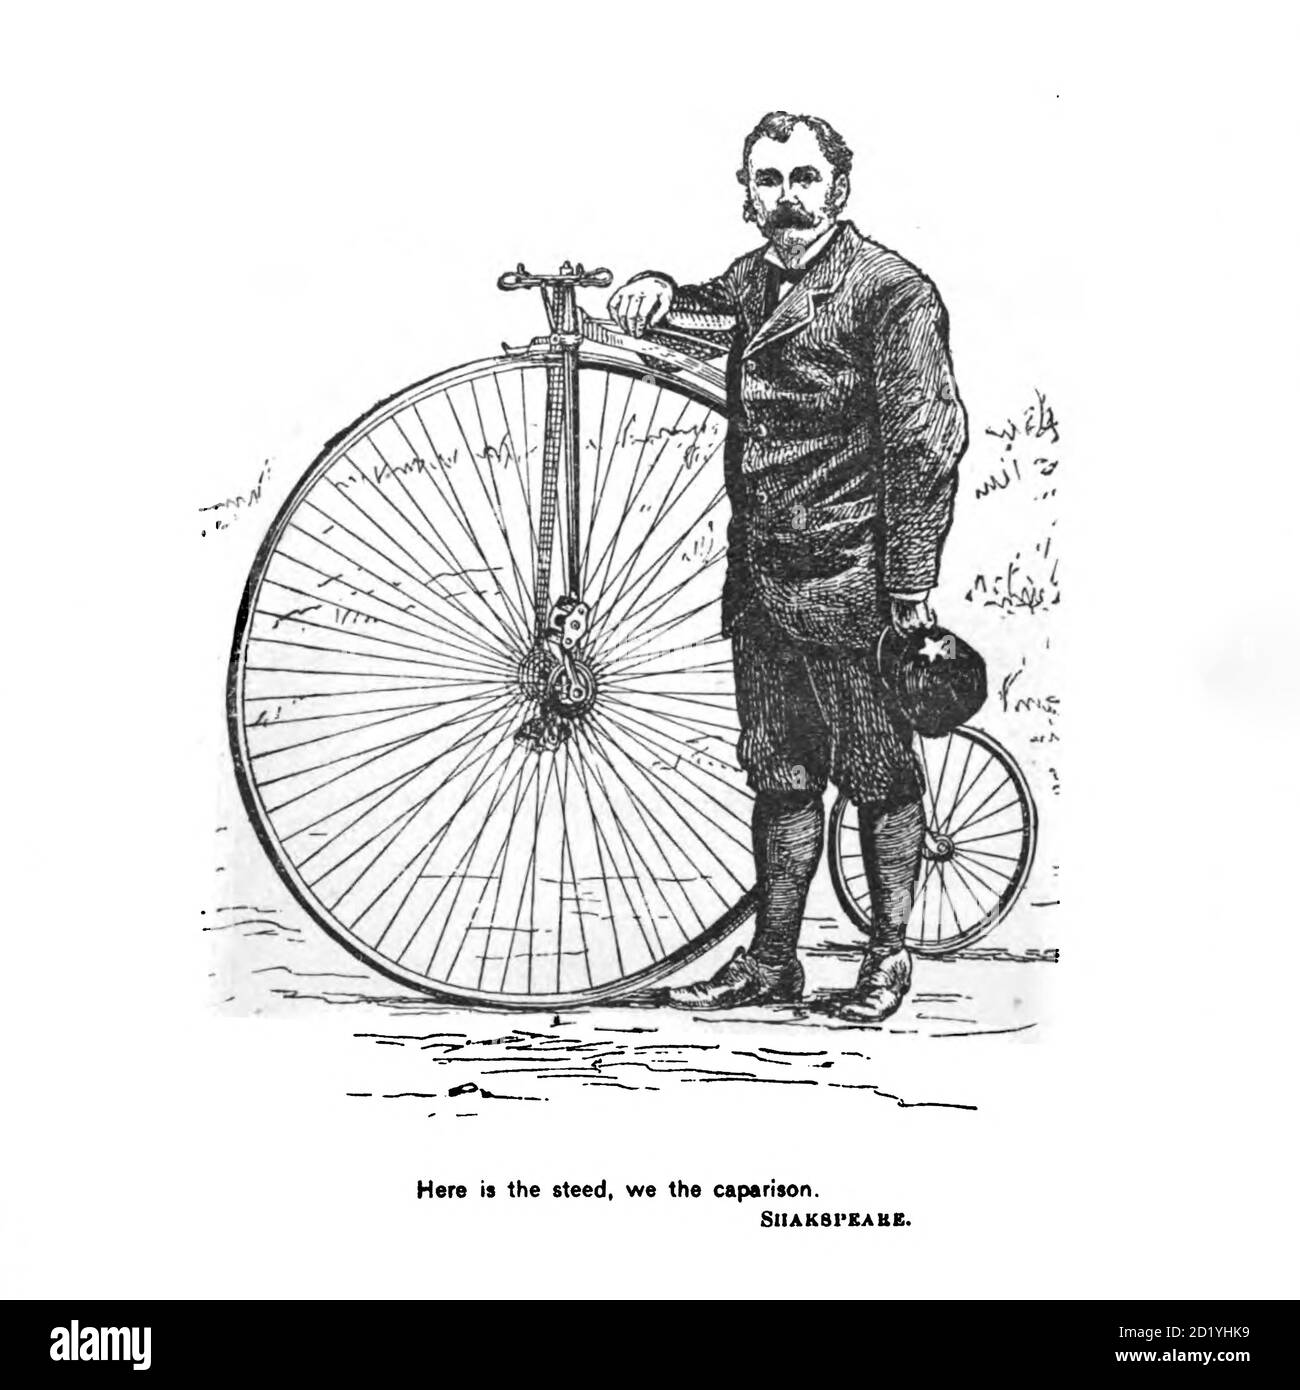 The American bicycler: a manual for the observer, the learner, and the expert by Pratt, Charles E. (Charles Eadward), 1845-1898. Publication date 1879. Publisher Boston, Houghton, Osgood and company Stock Photo